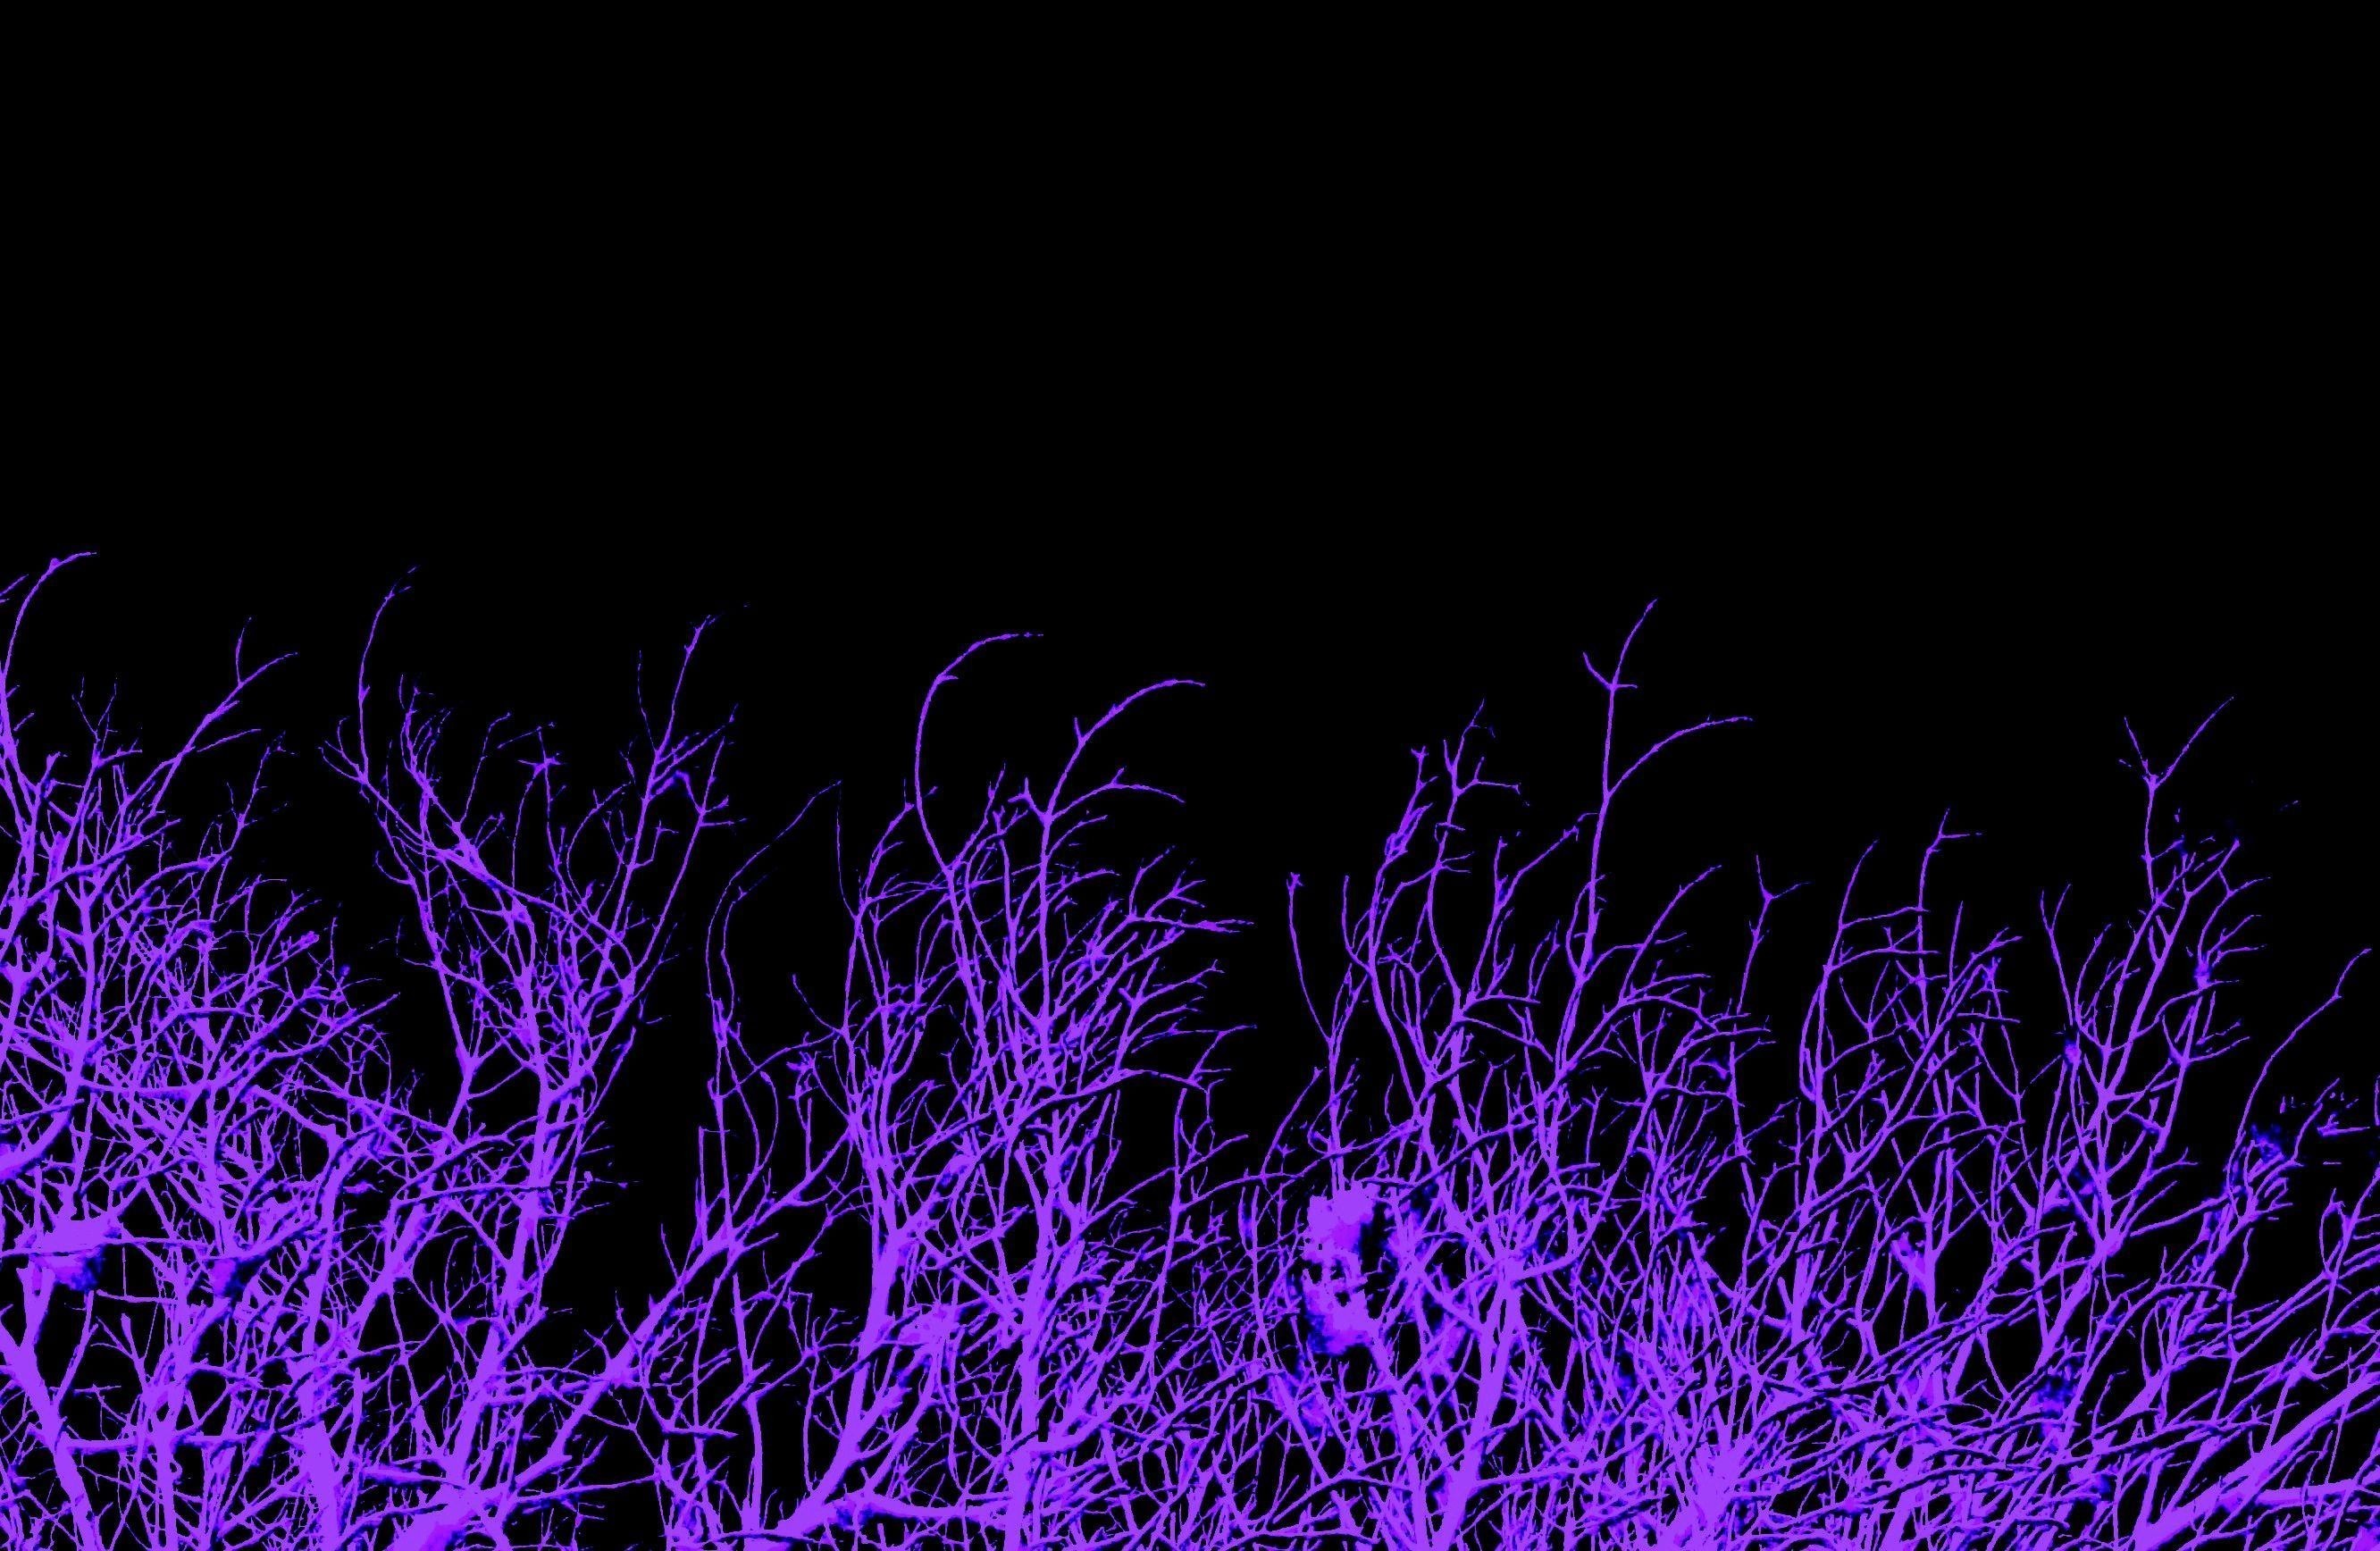 2664x1736  Wallpapers For > Dark Purple Background Tumblr Dark Purple  Background Tumblr